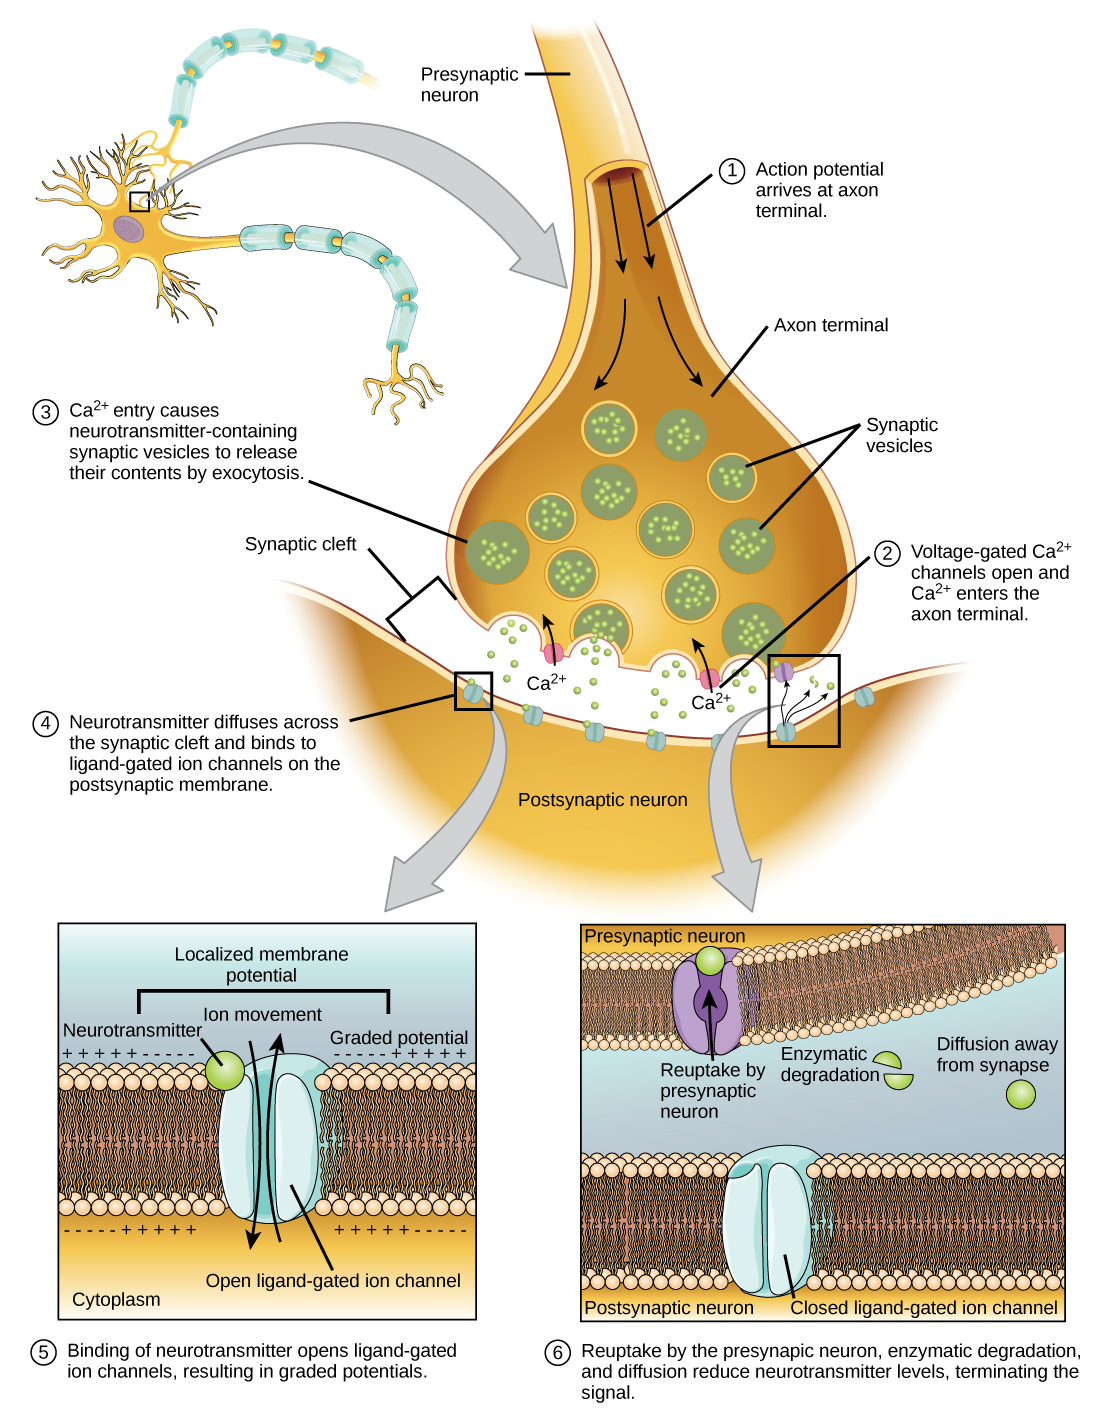 Illustration shows a narrow axon of a presynaptic cell widening into a bulb-like axon terminal. A narrow synaptic cleft separates the axon terminal of the presynaptic cell from the postsynaptic cell. In step 1, an action potential arrives at the axon terminal. In step 2, the action potential causes voltage-gated calcium channels in the axon terminal open, allowing calcium to enter. In step 3, calcium influx causes neurotransmitter-containing synaptic vesicles to fuse with the plasma membrane. Contents of the vesicles are released into the synaptic cleft by exocytosis. In step 4, neurotransmitter diffuses across the synaptic cleft and binds ligand-gated ion channels on the postsynaptic membrane, causing the channels to open. In step 5, the open channels cause ion movement into or out of the cell, resulting in a localized change in membrane potential. In step 6, reuptake by the presynaptic neuron, enzymatic degradation and diffusion reduce neurotransmitter levels, terminating the signal.